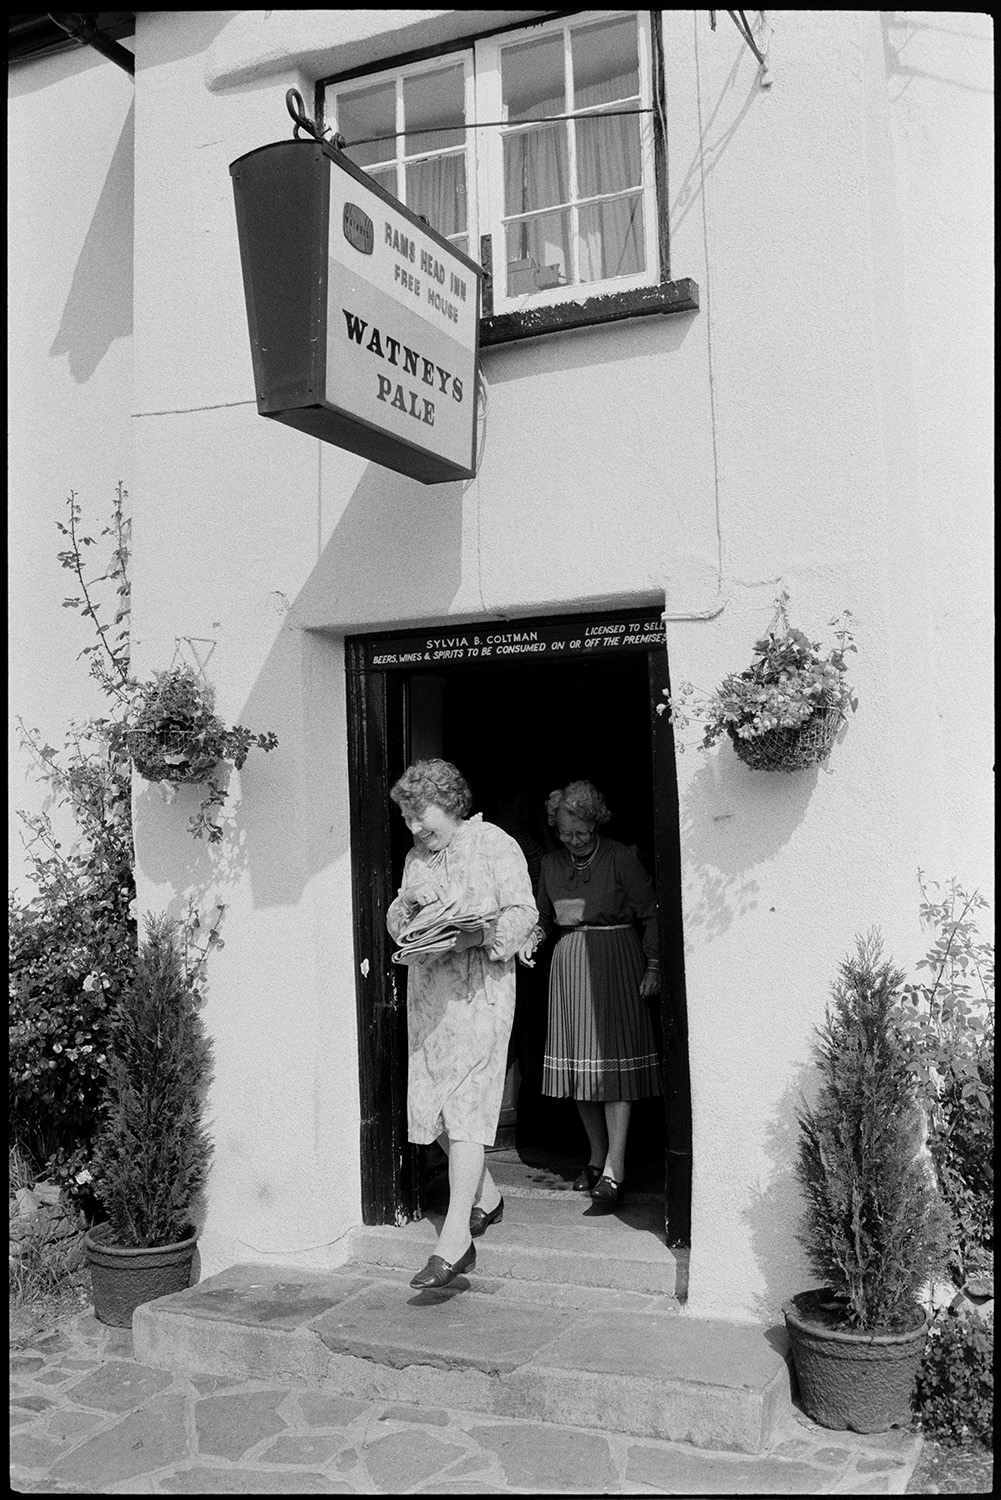 Sunday newspaper seller at door of pub, people buying papers.
[Two women leaving the entrance of the Rams Head Inn, Dolton after buying Sunday newspapers. The licensing sign is visible above the entrance reading 'Sylvia B. Coltman'. There are hanging baskets and conifers in tubs either side of the entrance.]